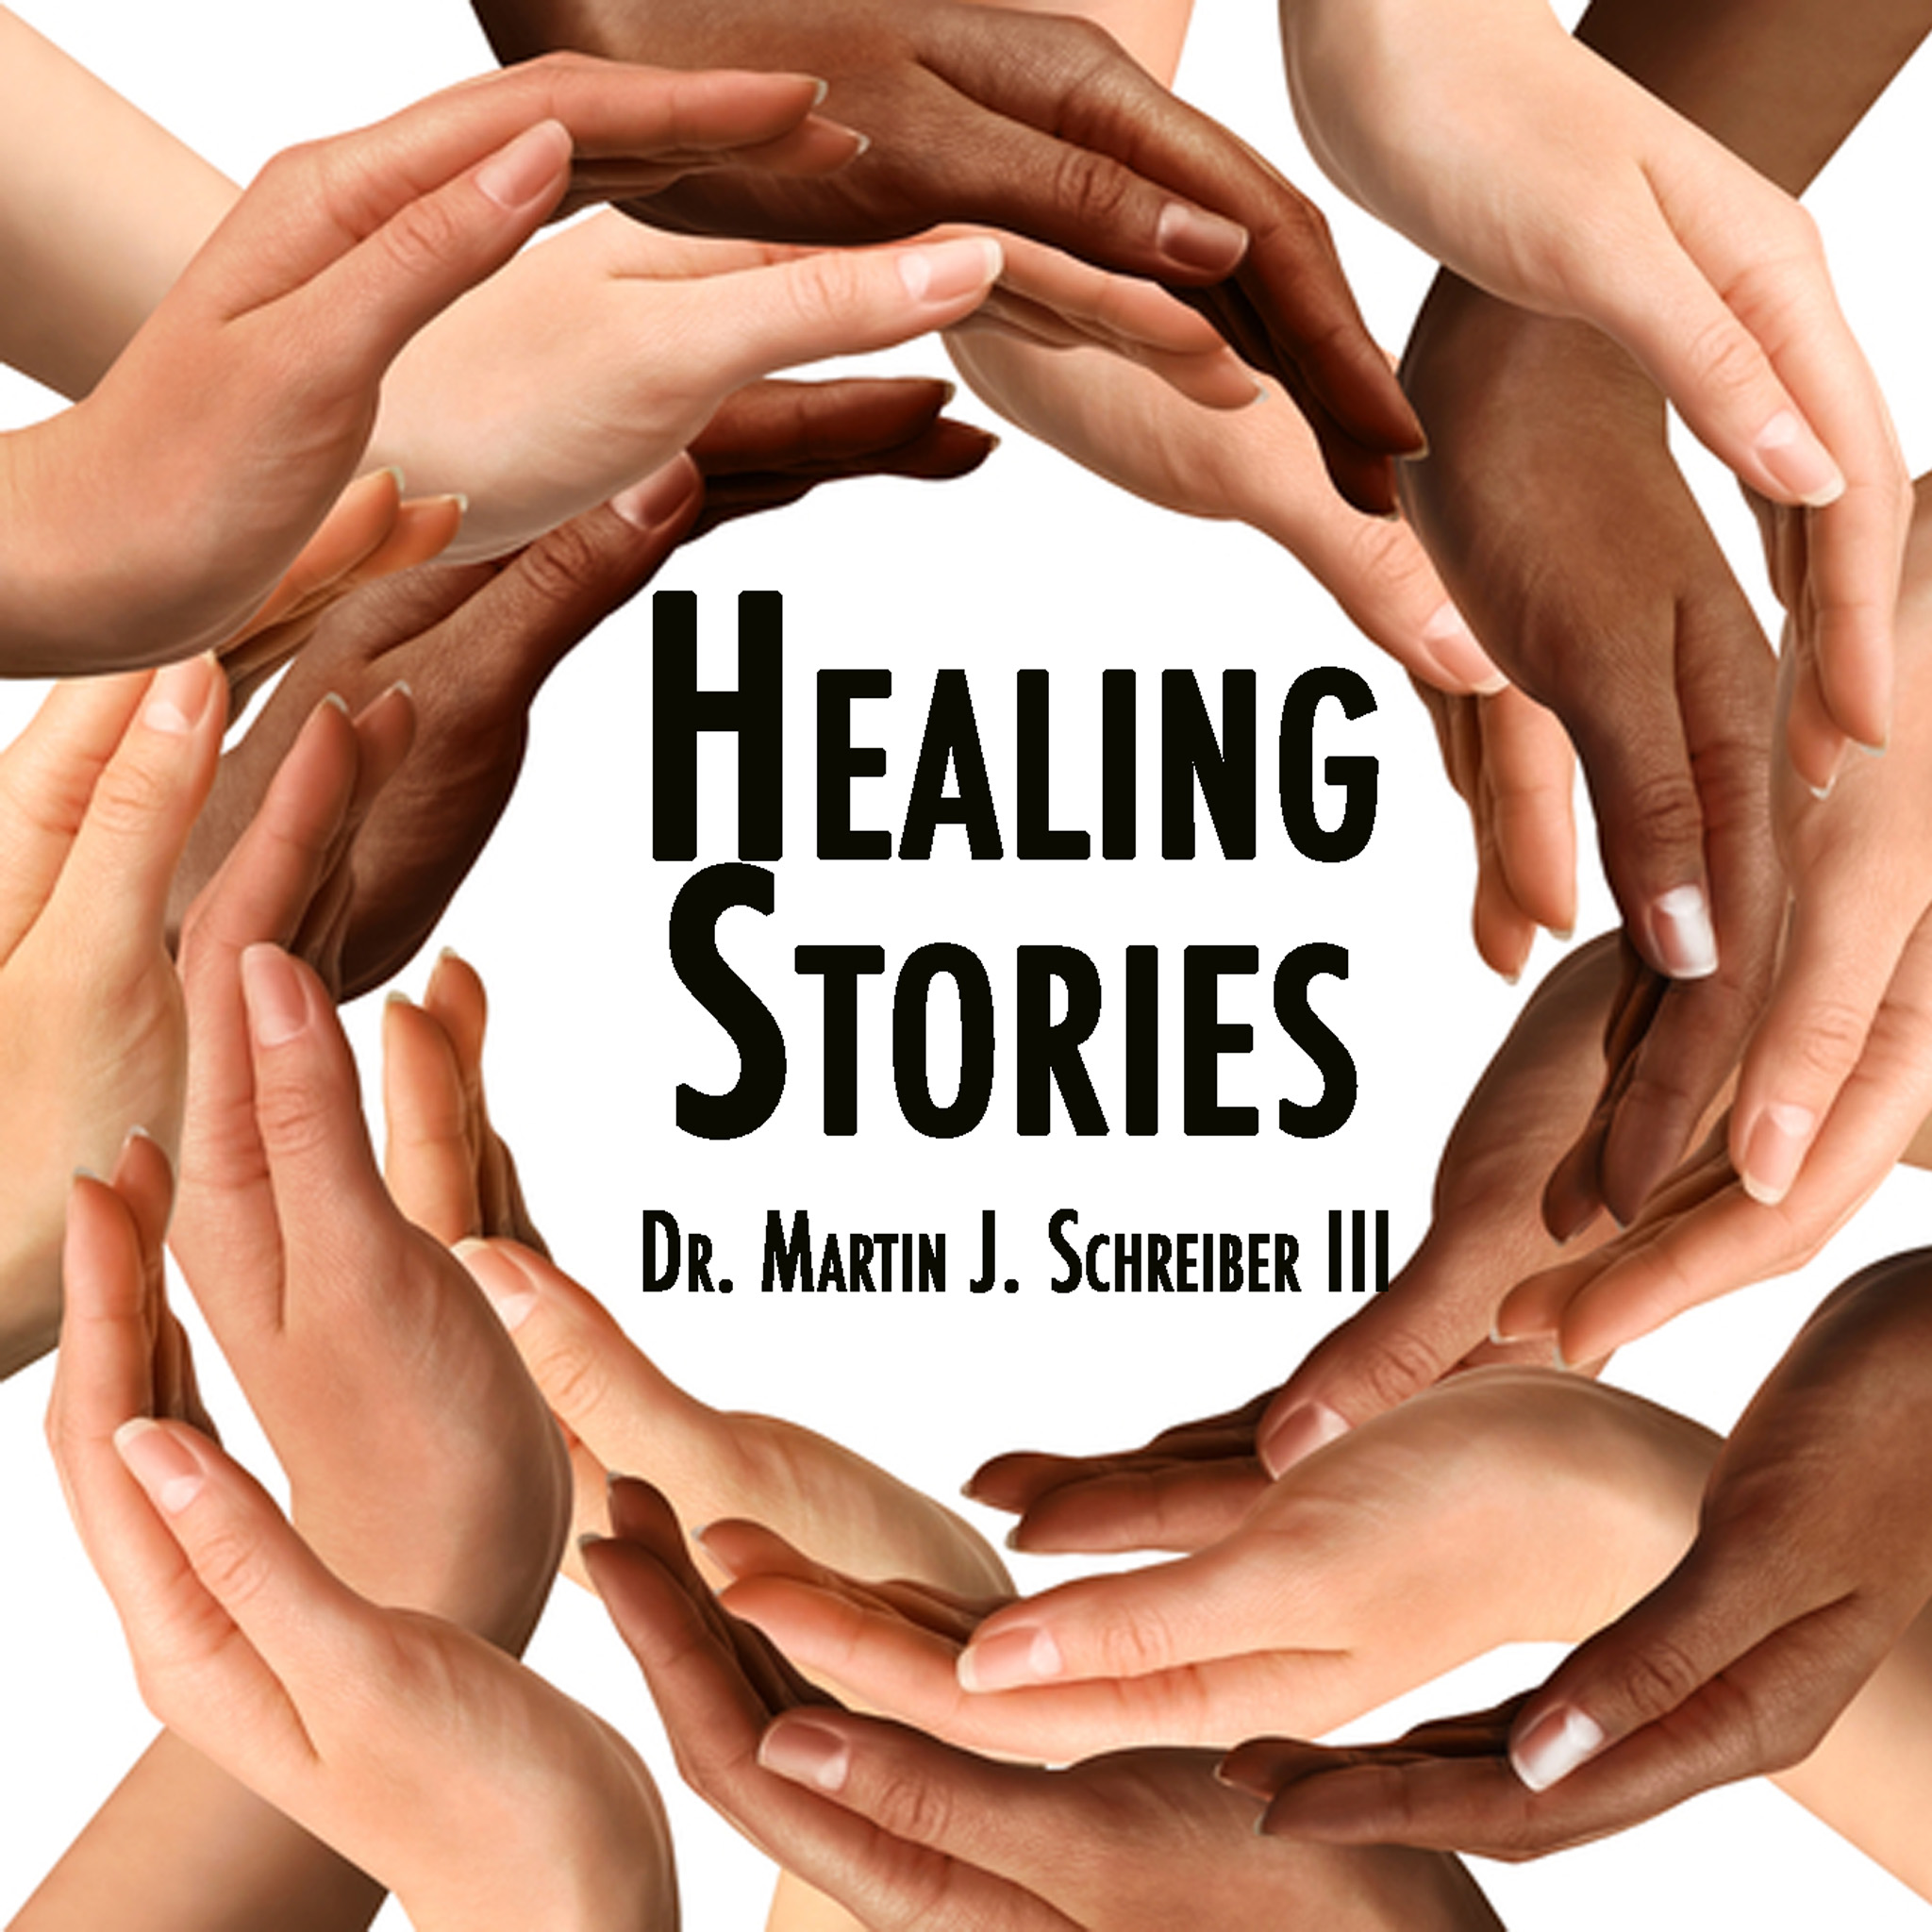 Introduction to Healing Stories